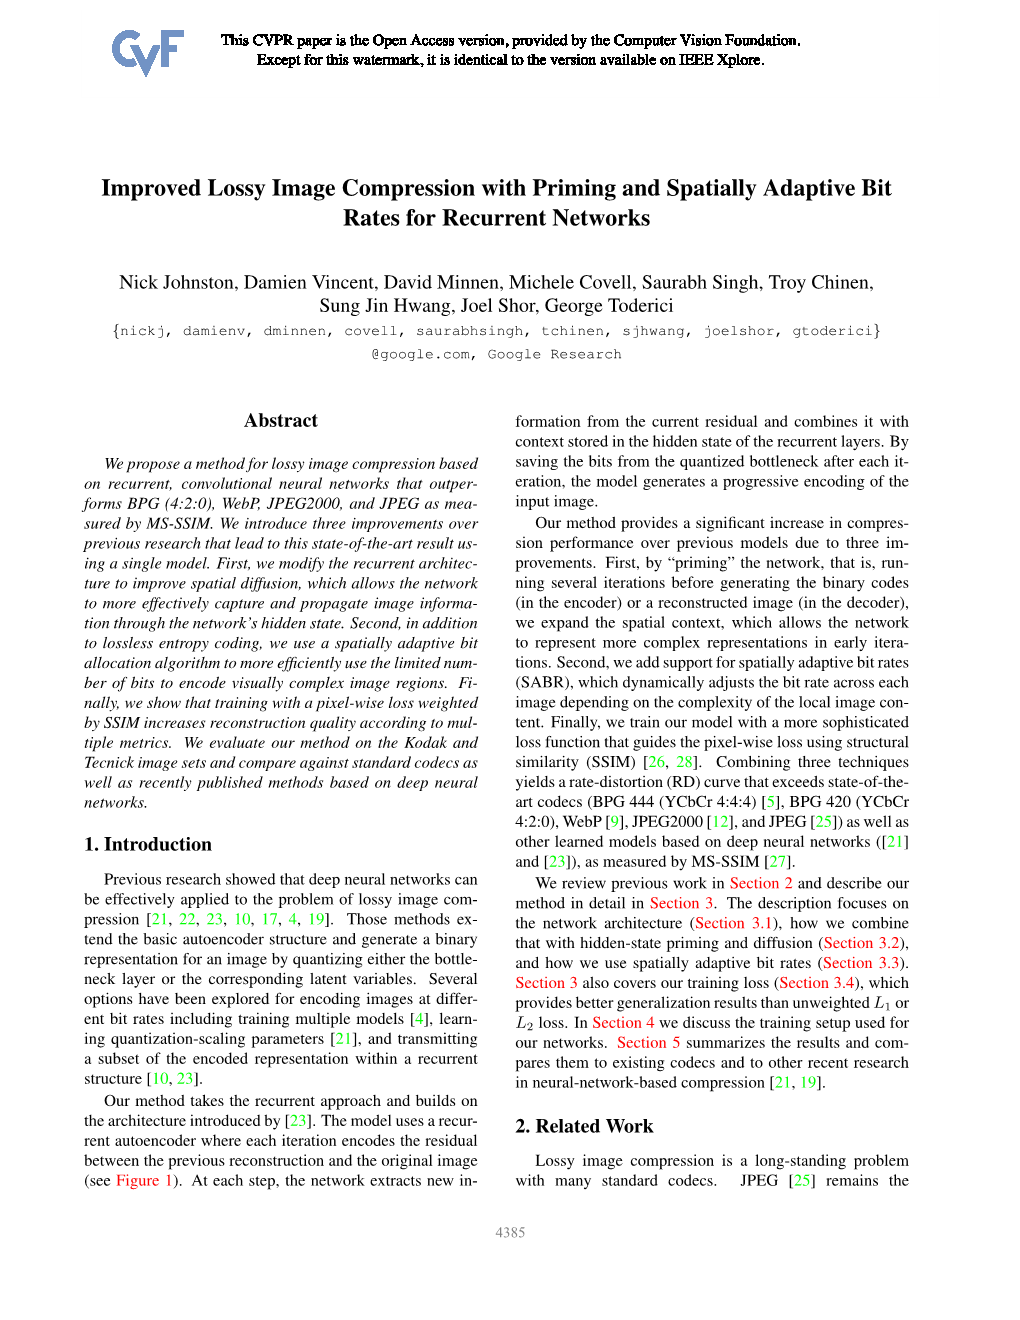 Improved Lossy Image Compression with Priming and Spatially Adaptive Bit Rates for Recurrent Networks